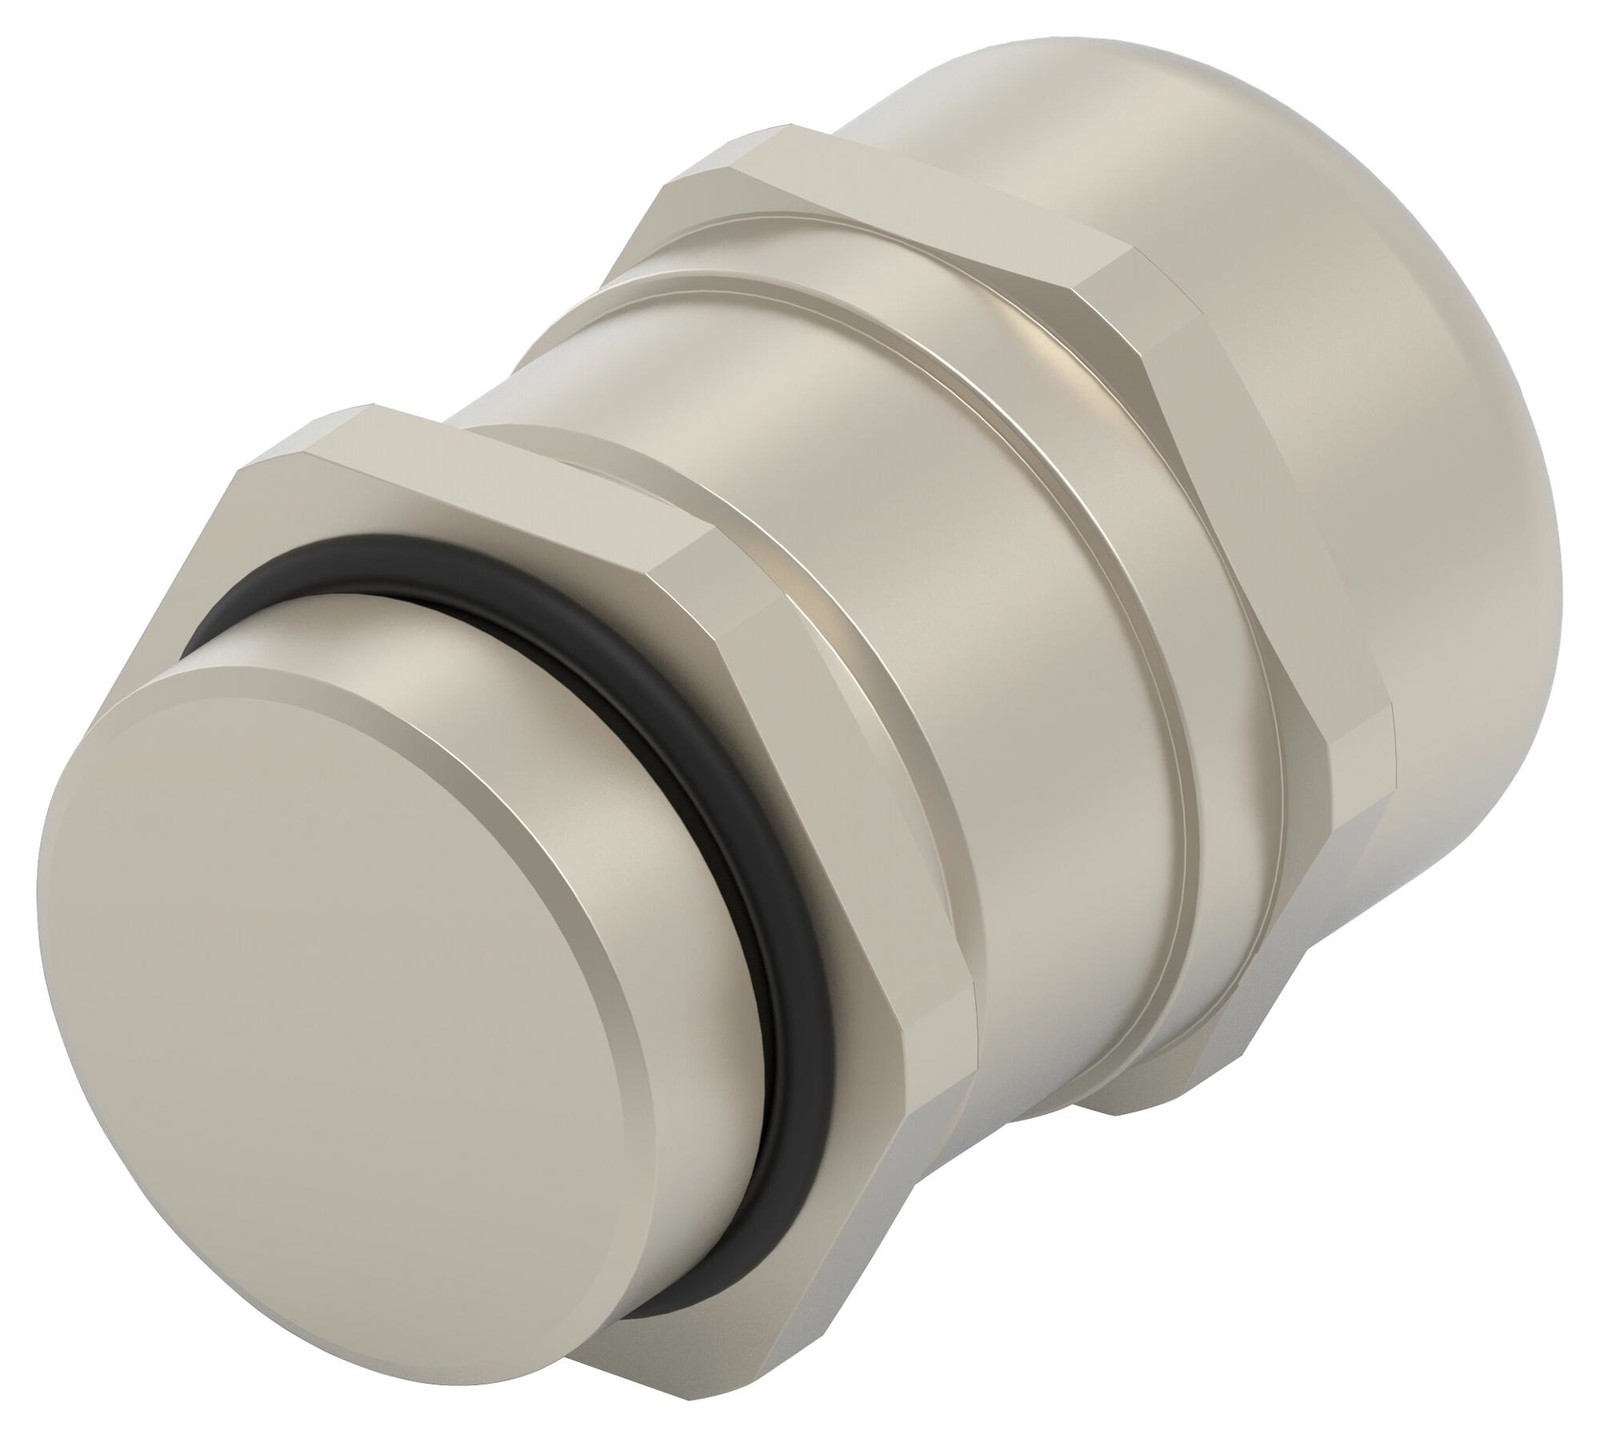 Entrelec TE Connectivity 1Sng613010R0000 Cable Gland, Brass, 14mm, M25X1.5